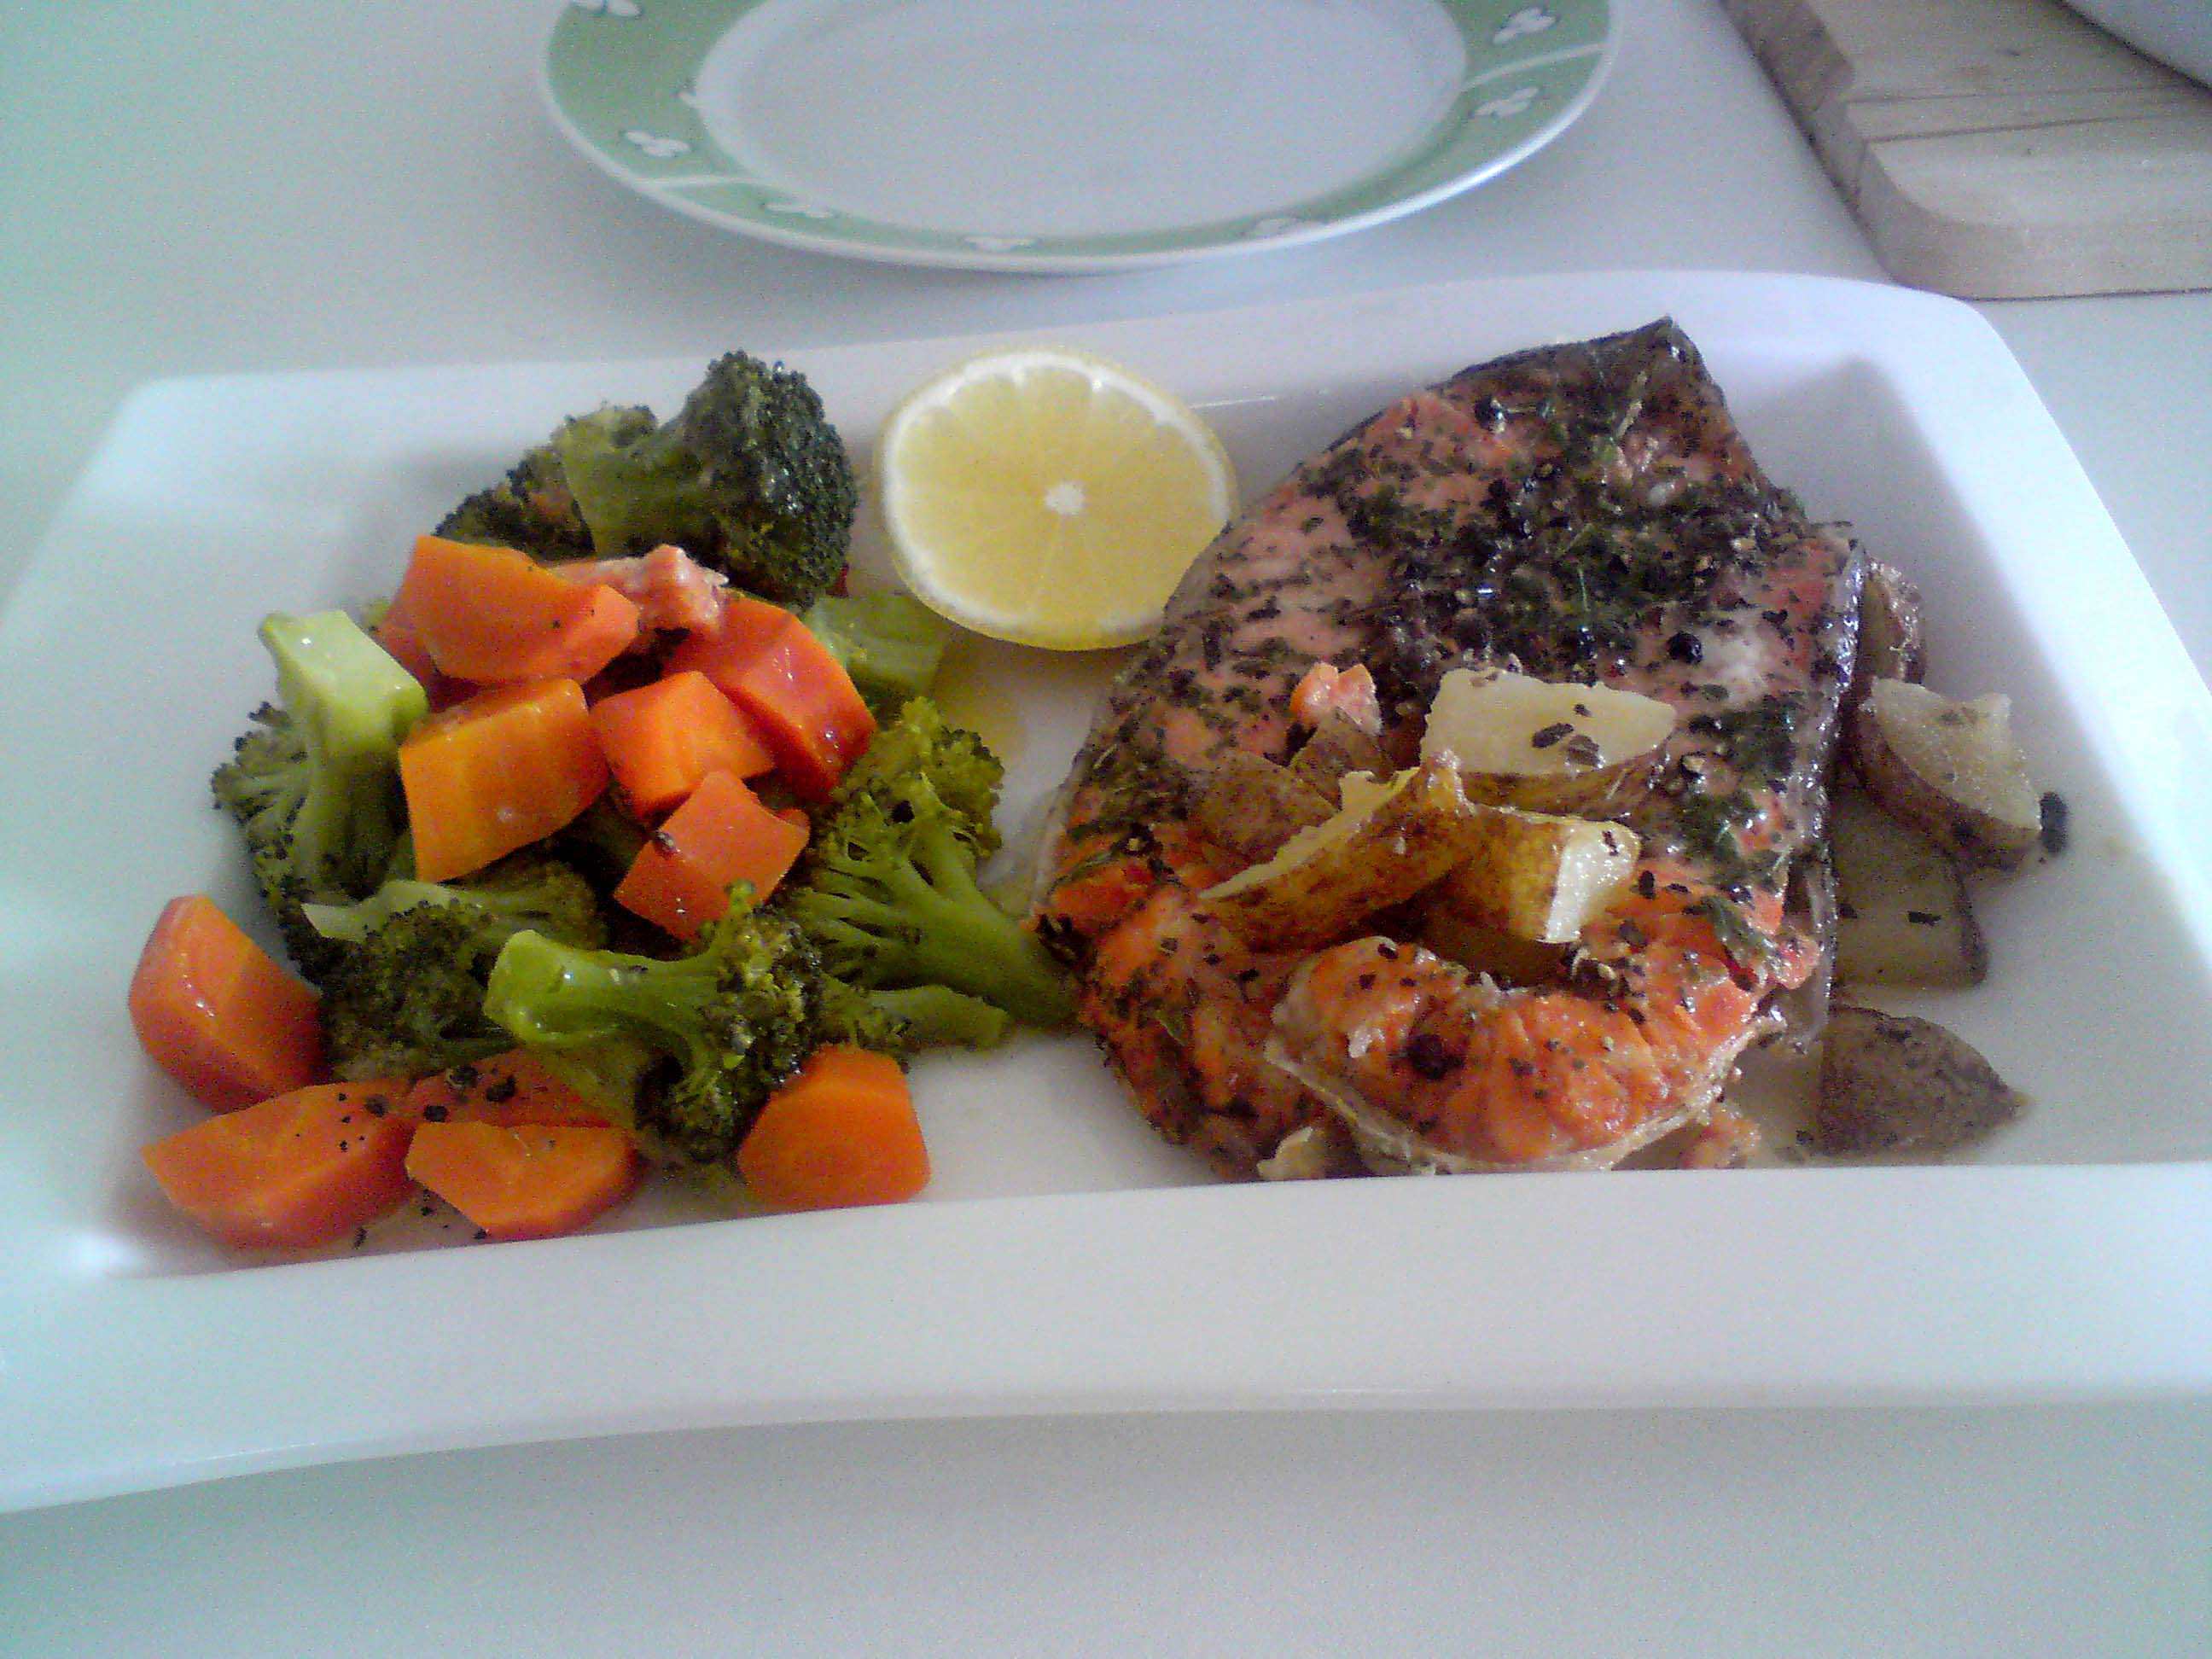 Side Dishes For Baked Salmon
 Baked salmon and potatoes with carrot & broccoli side dish